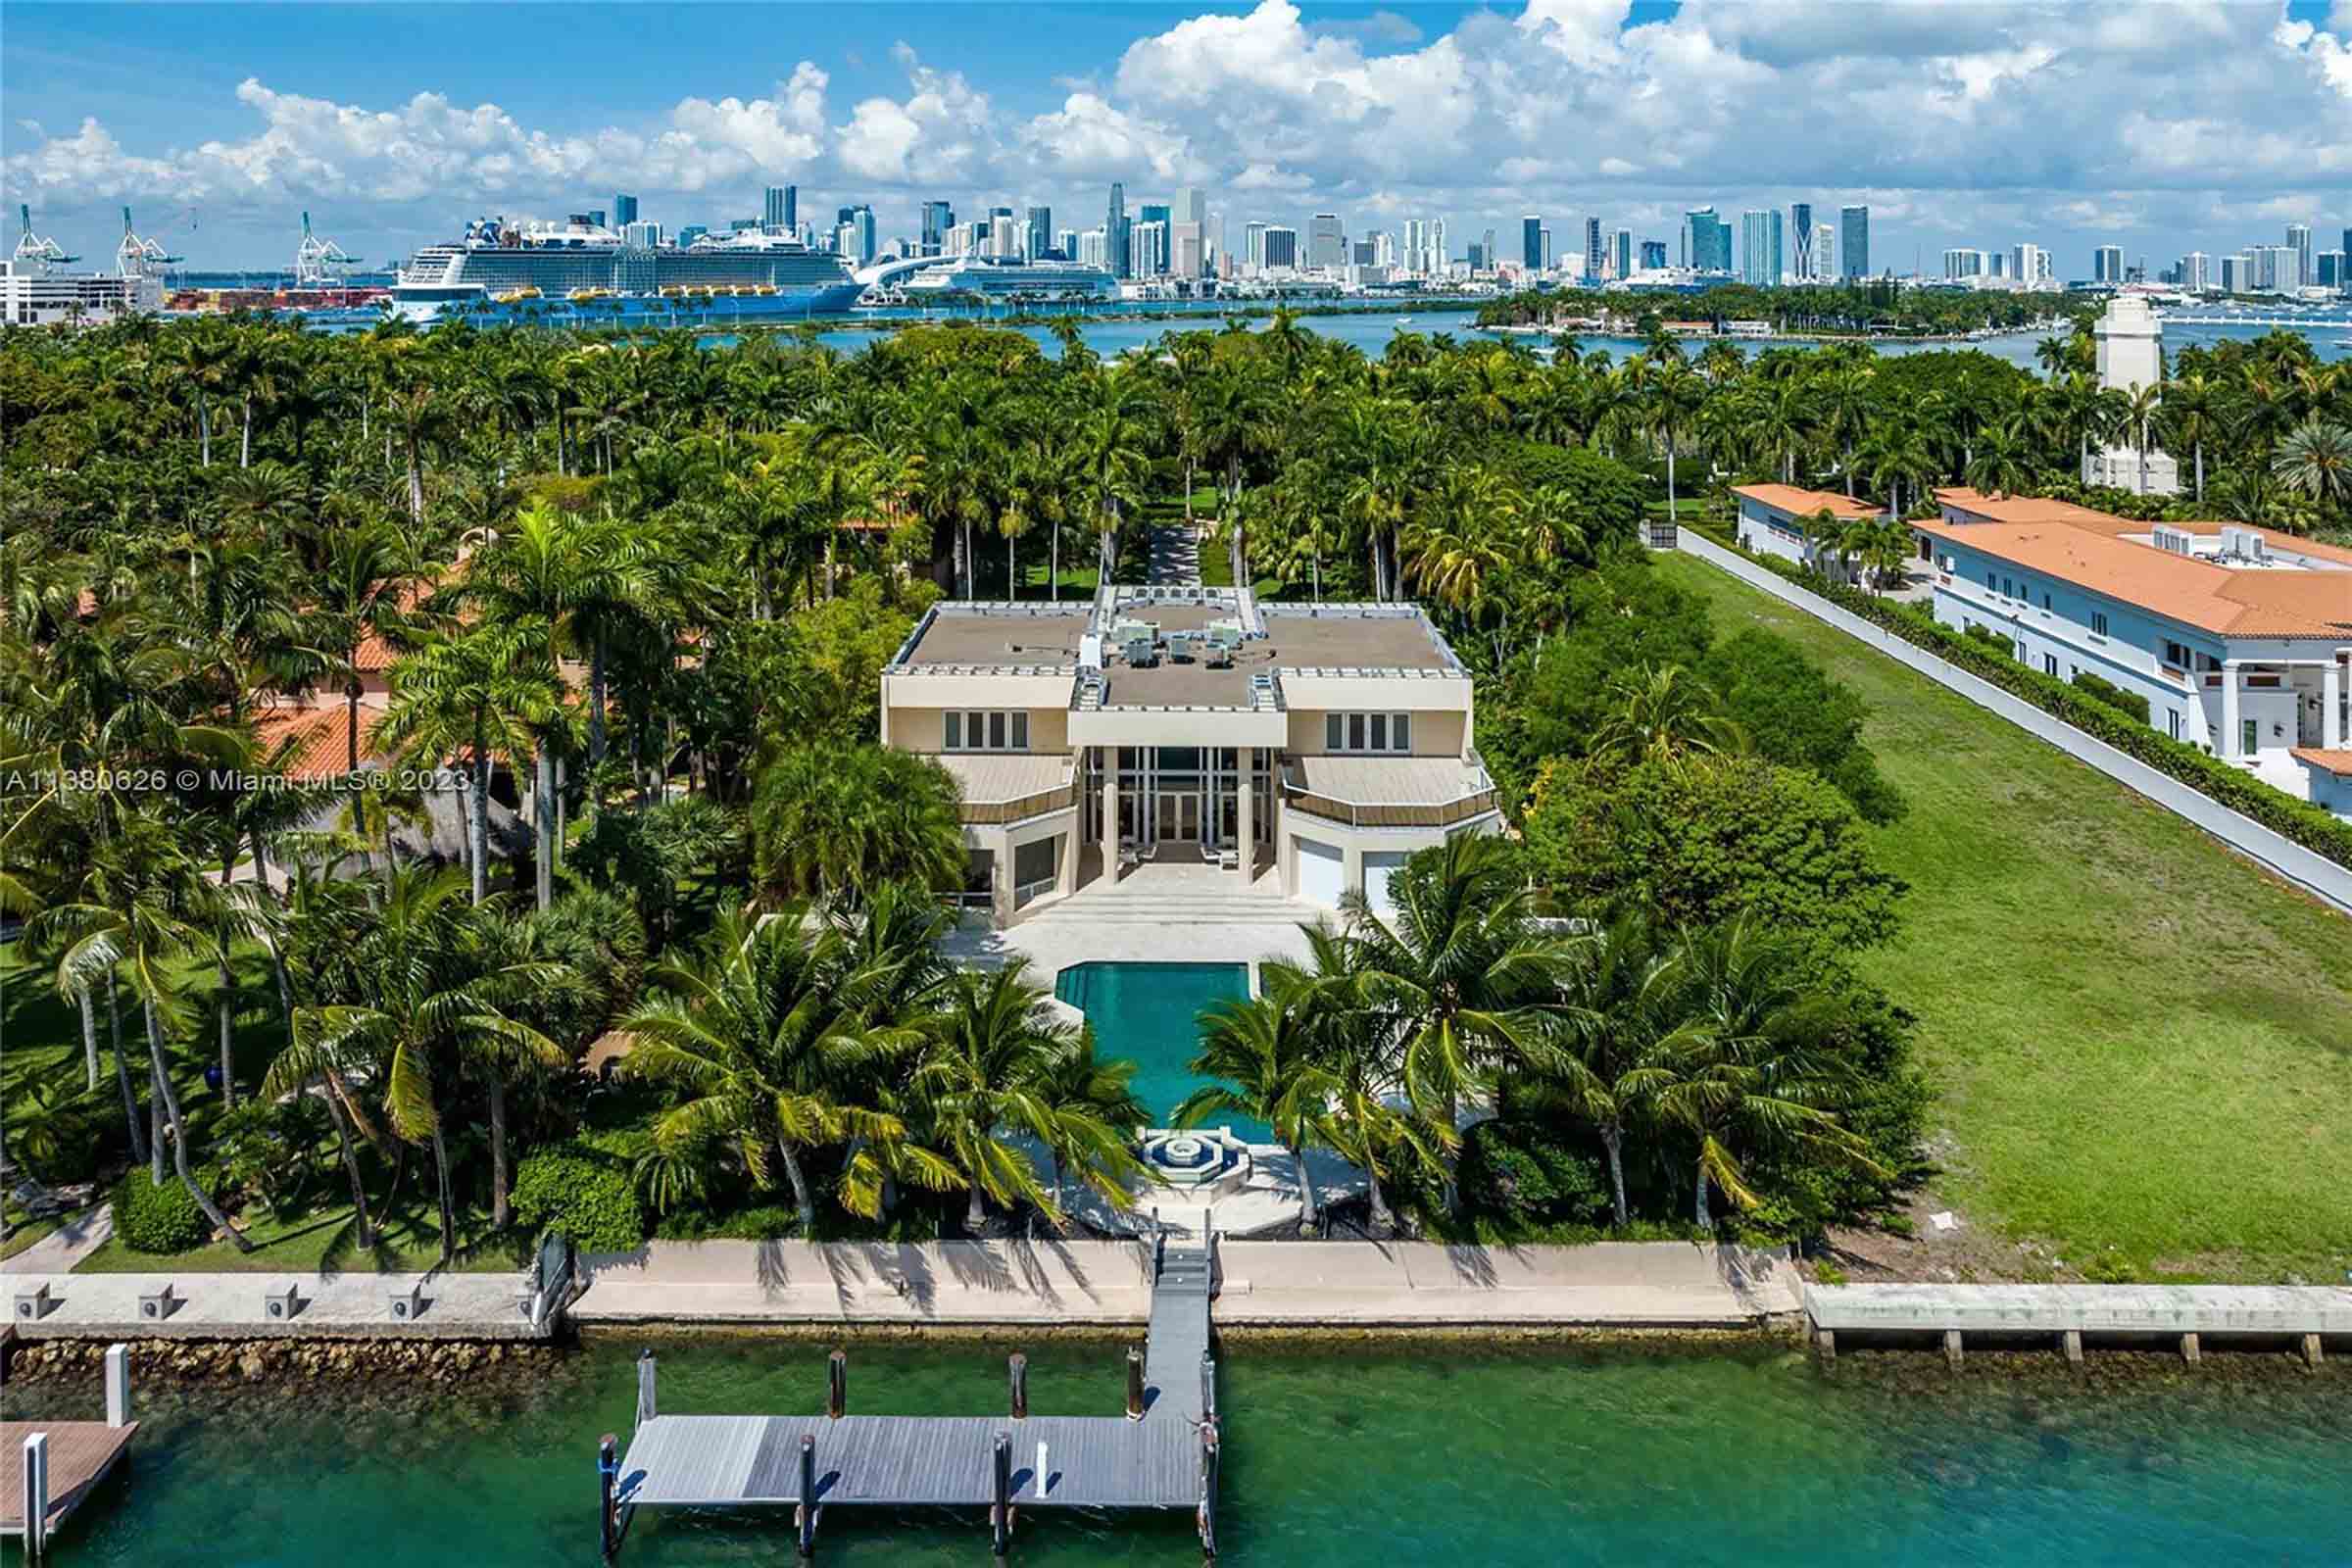 Every Day He's Hustlin' - Inside Rick Ross's New Star Island Waterfront ...